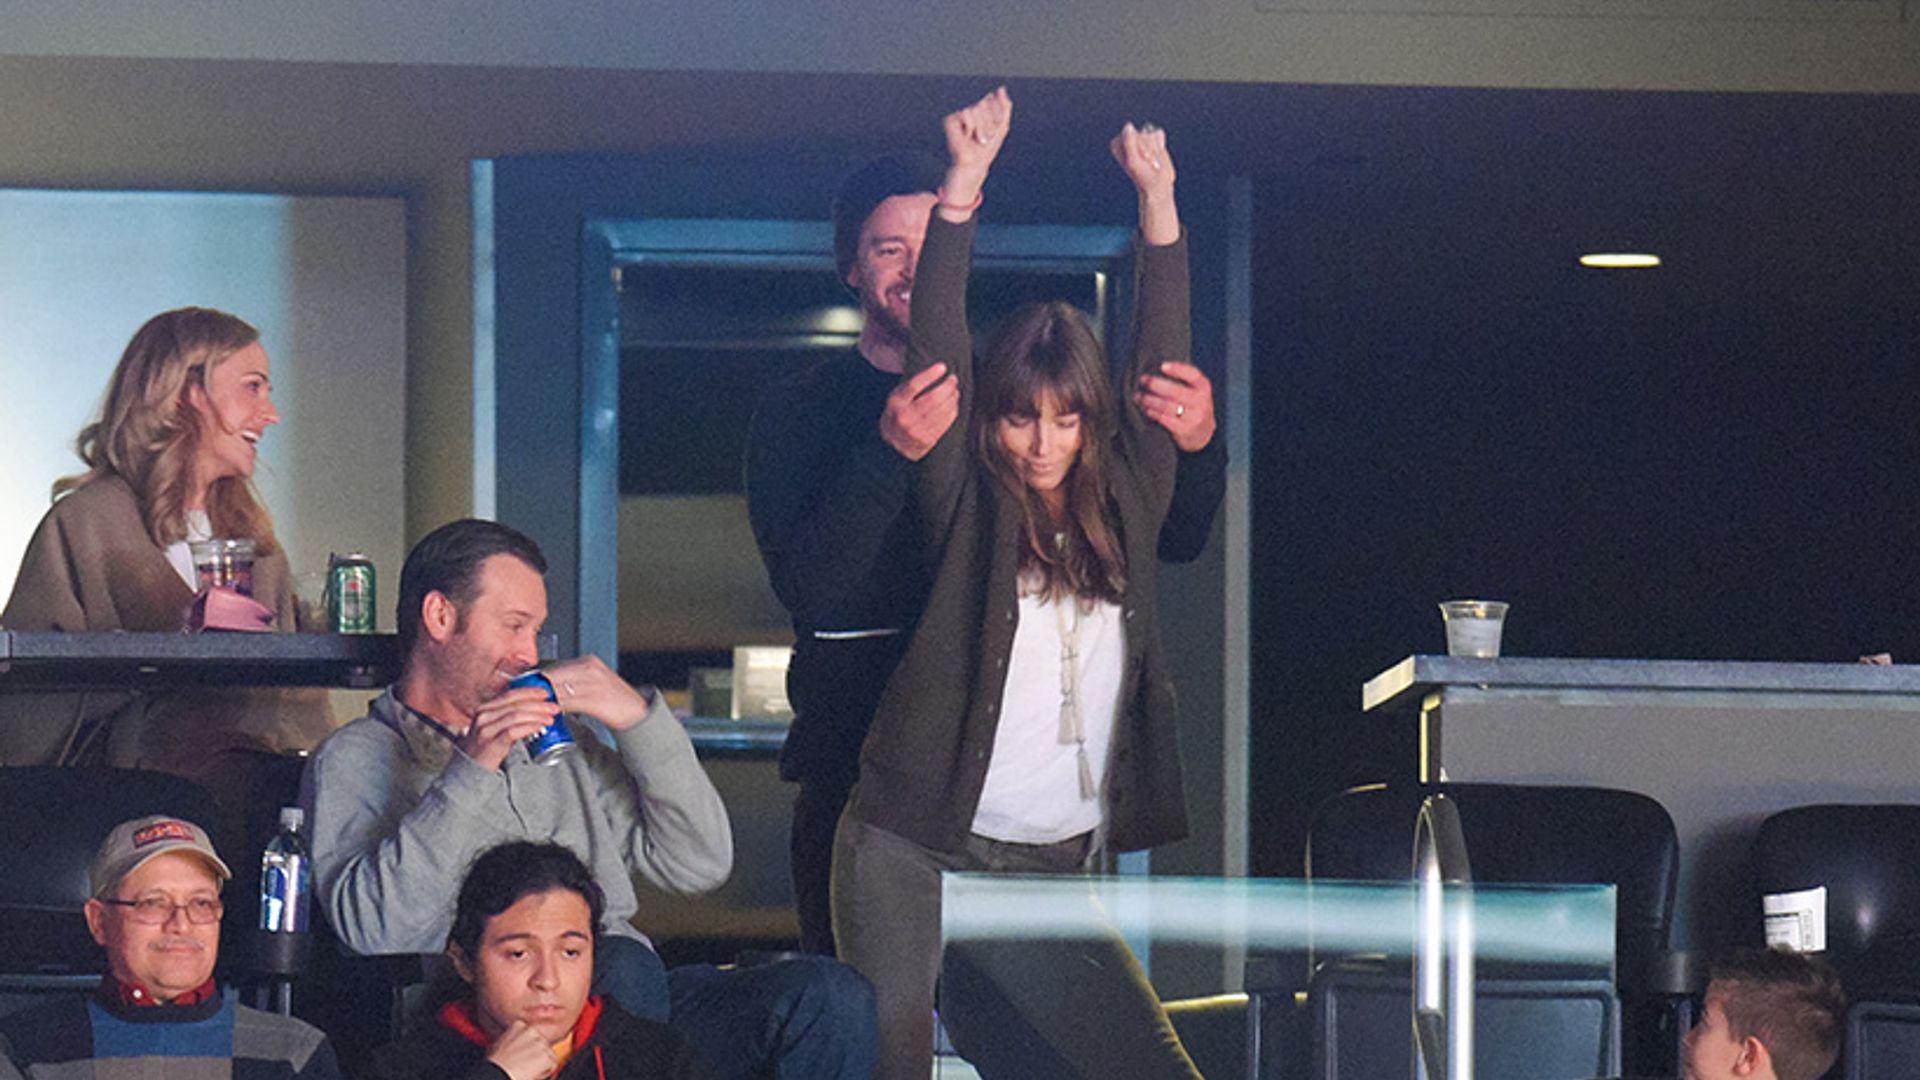 Jessica Biel 'can't stop' dancing with Justin Timberlake during basketball game